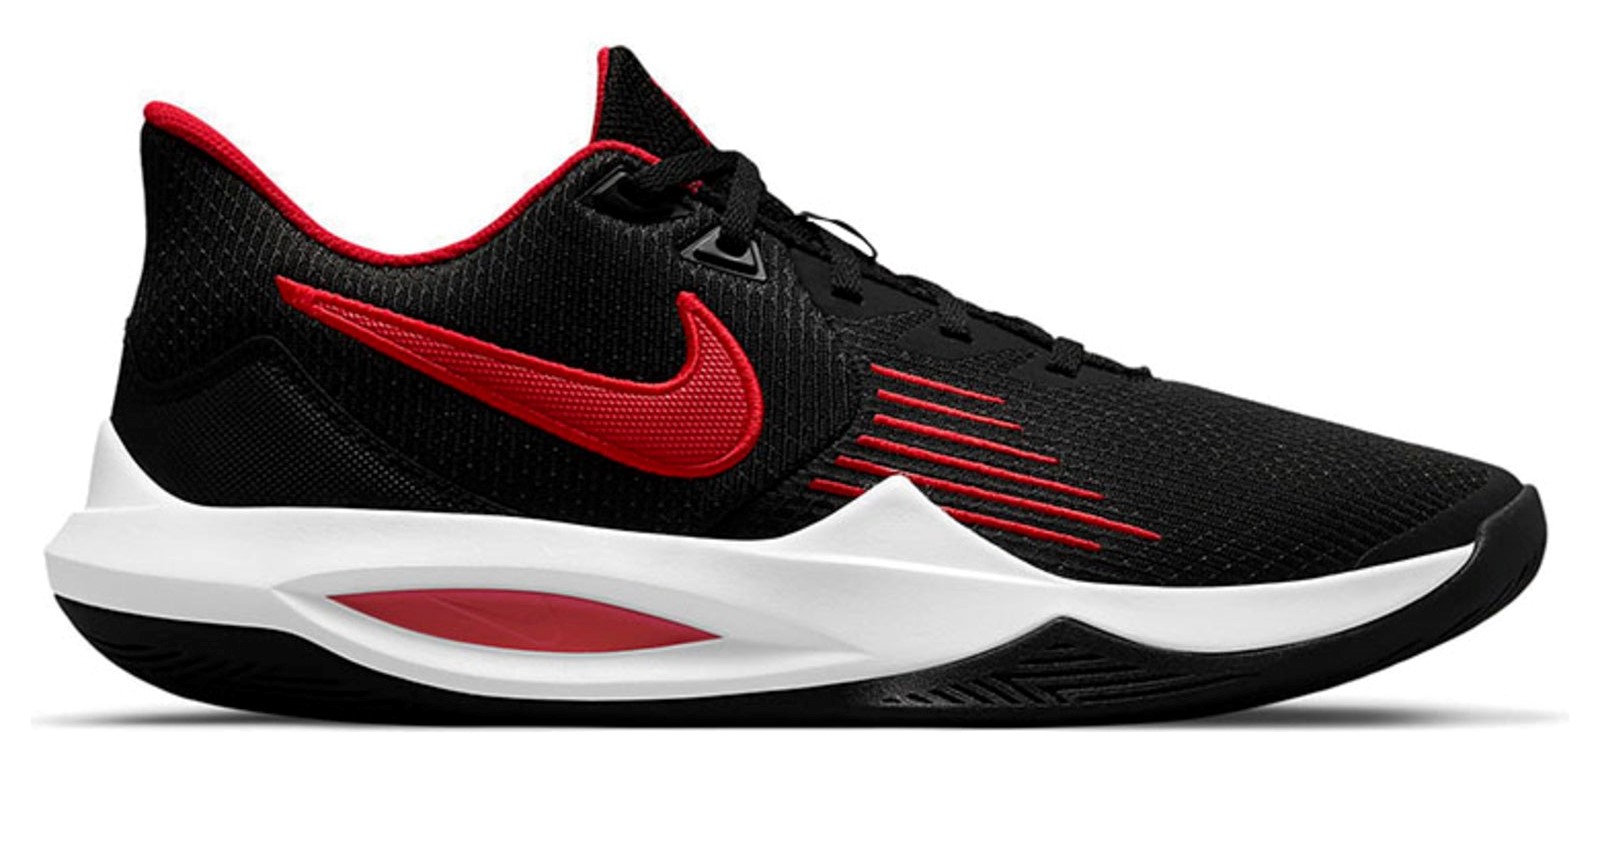 The Top 10 Best Nike Basketball Shoes in 2022 (Pro Picks!)